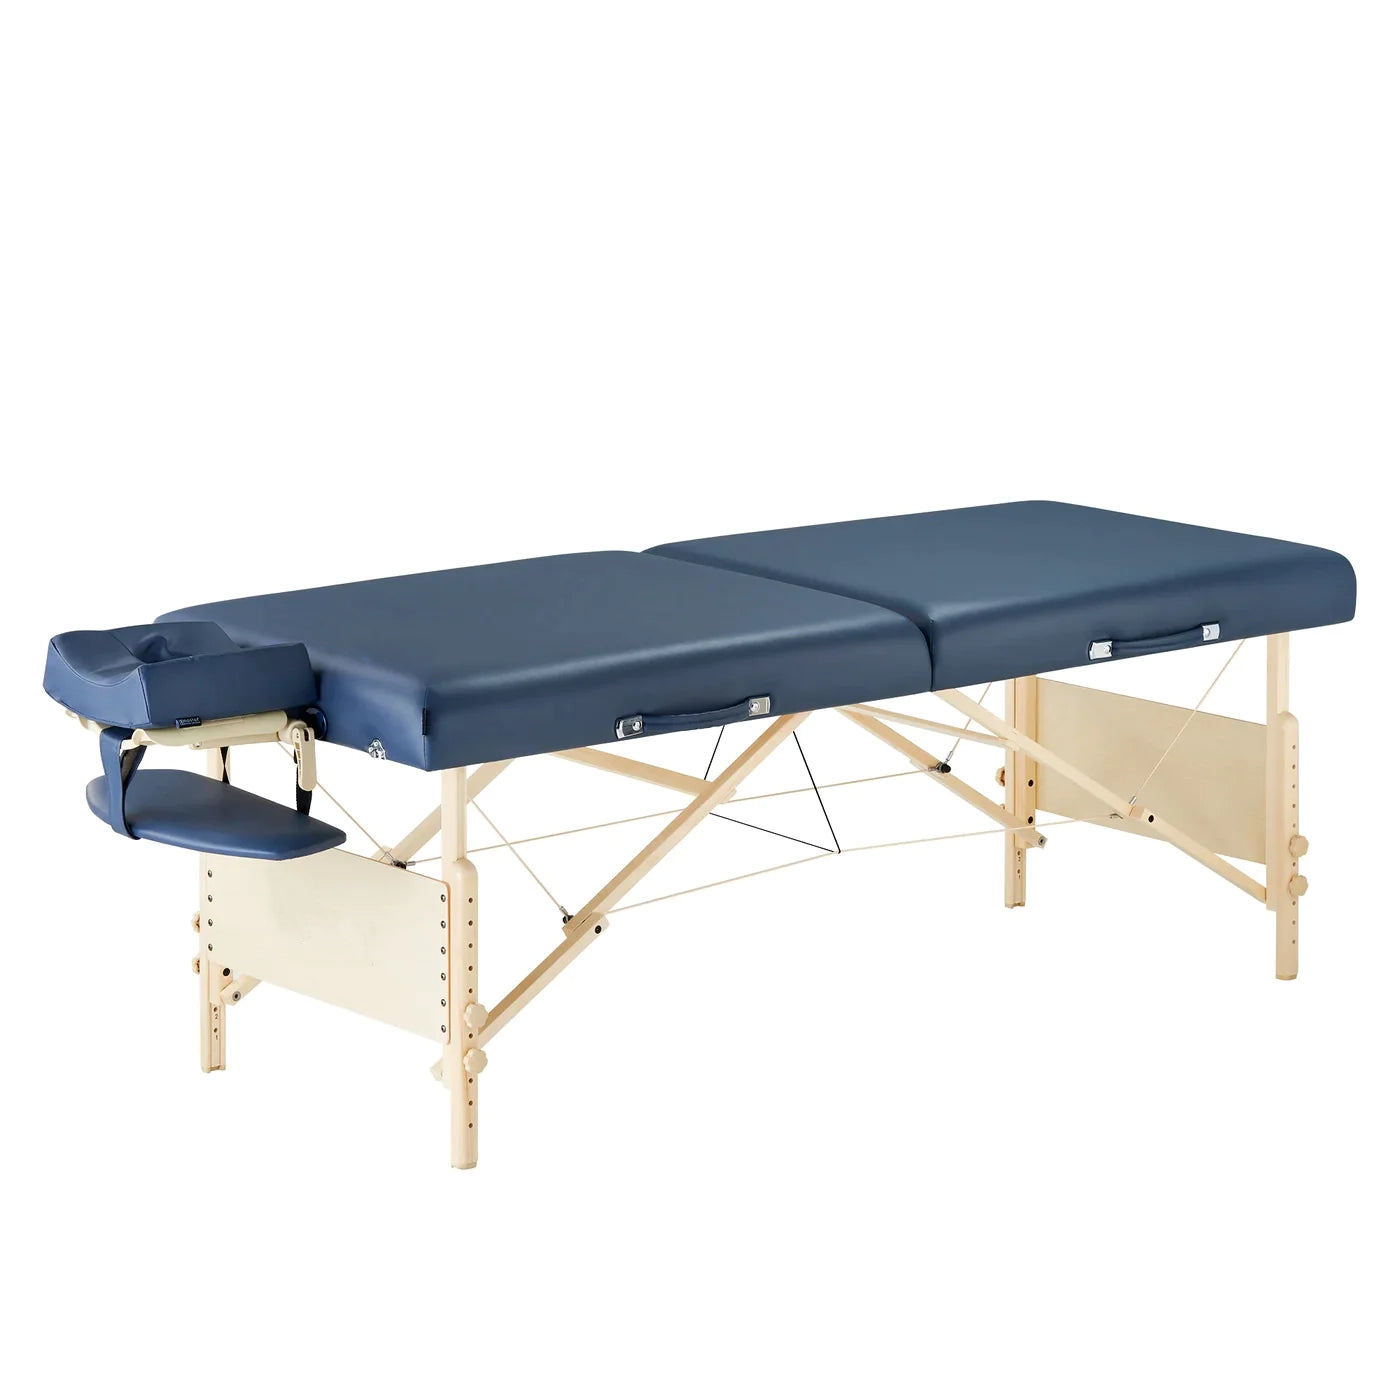 Bella2bello 30" CORONADO™ Portable Massage Table Package with Ambient Light System